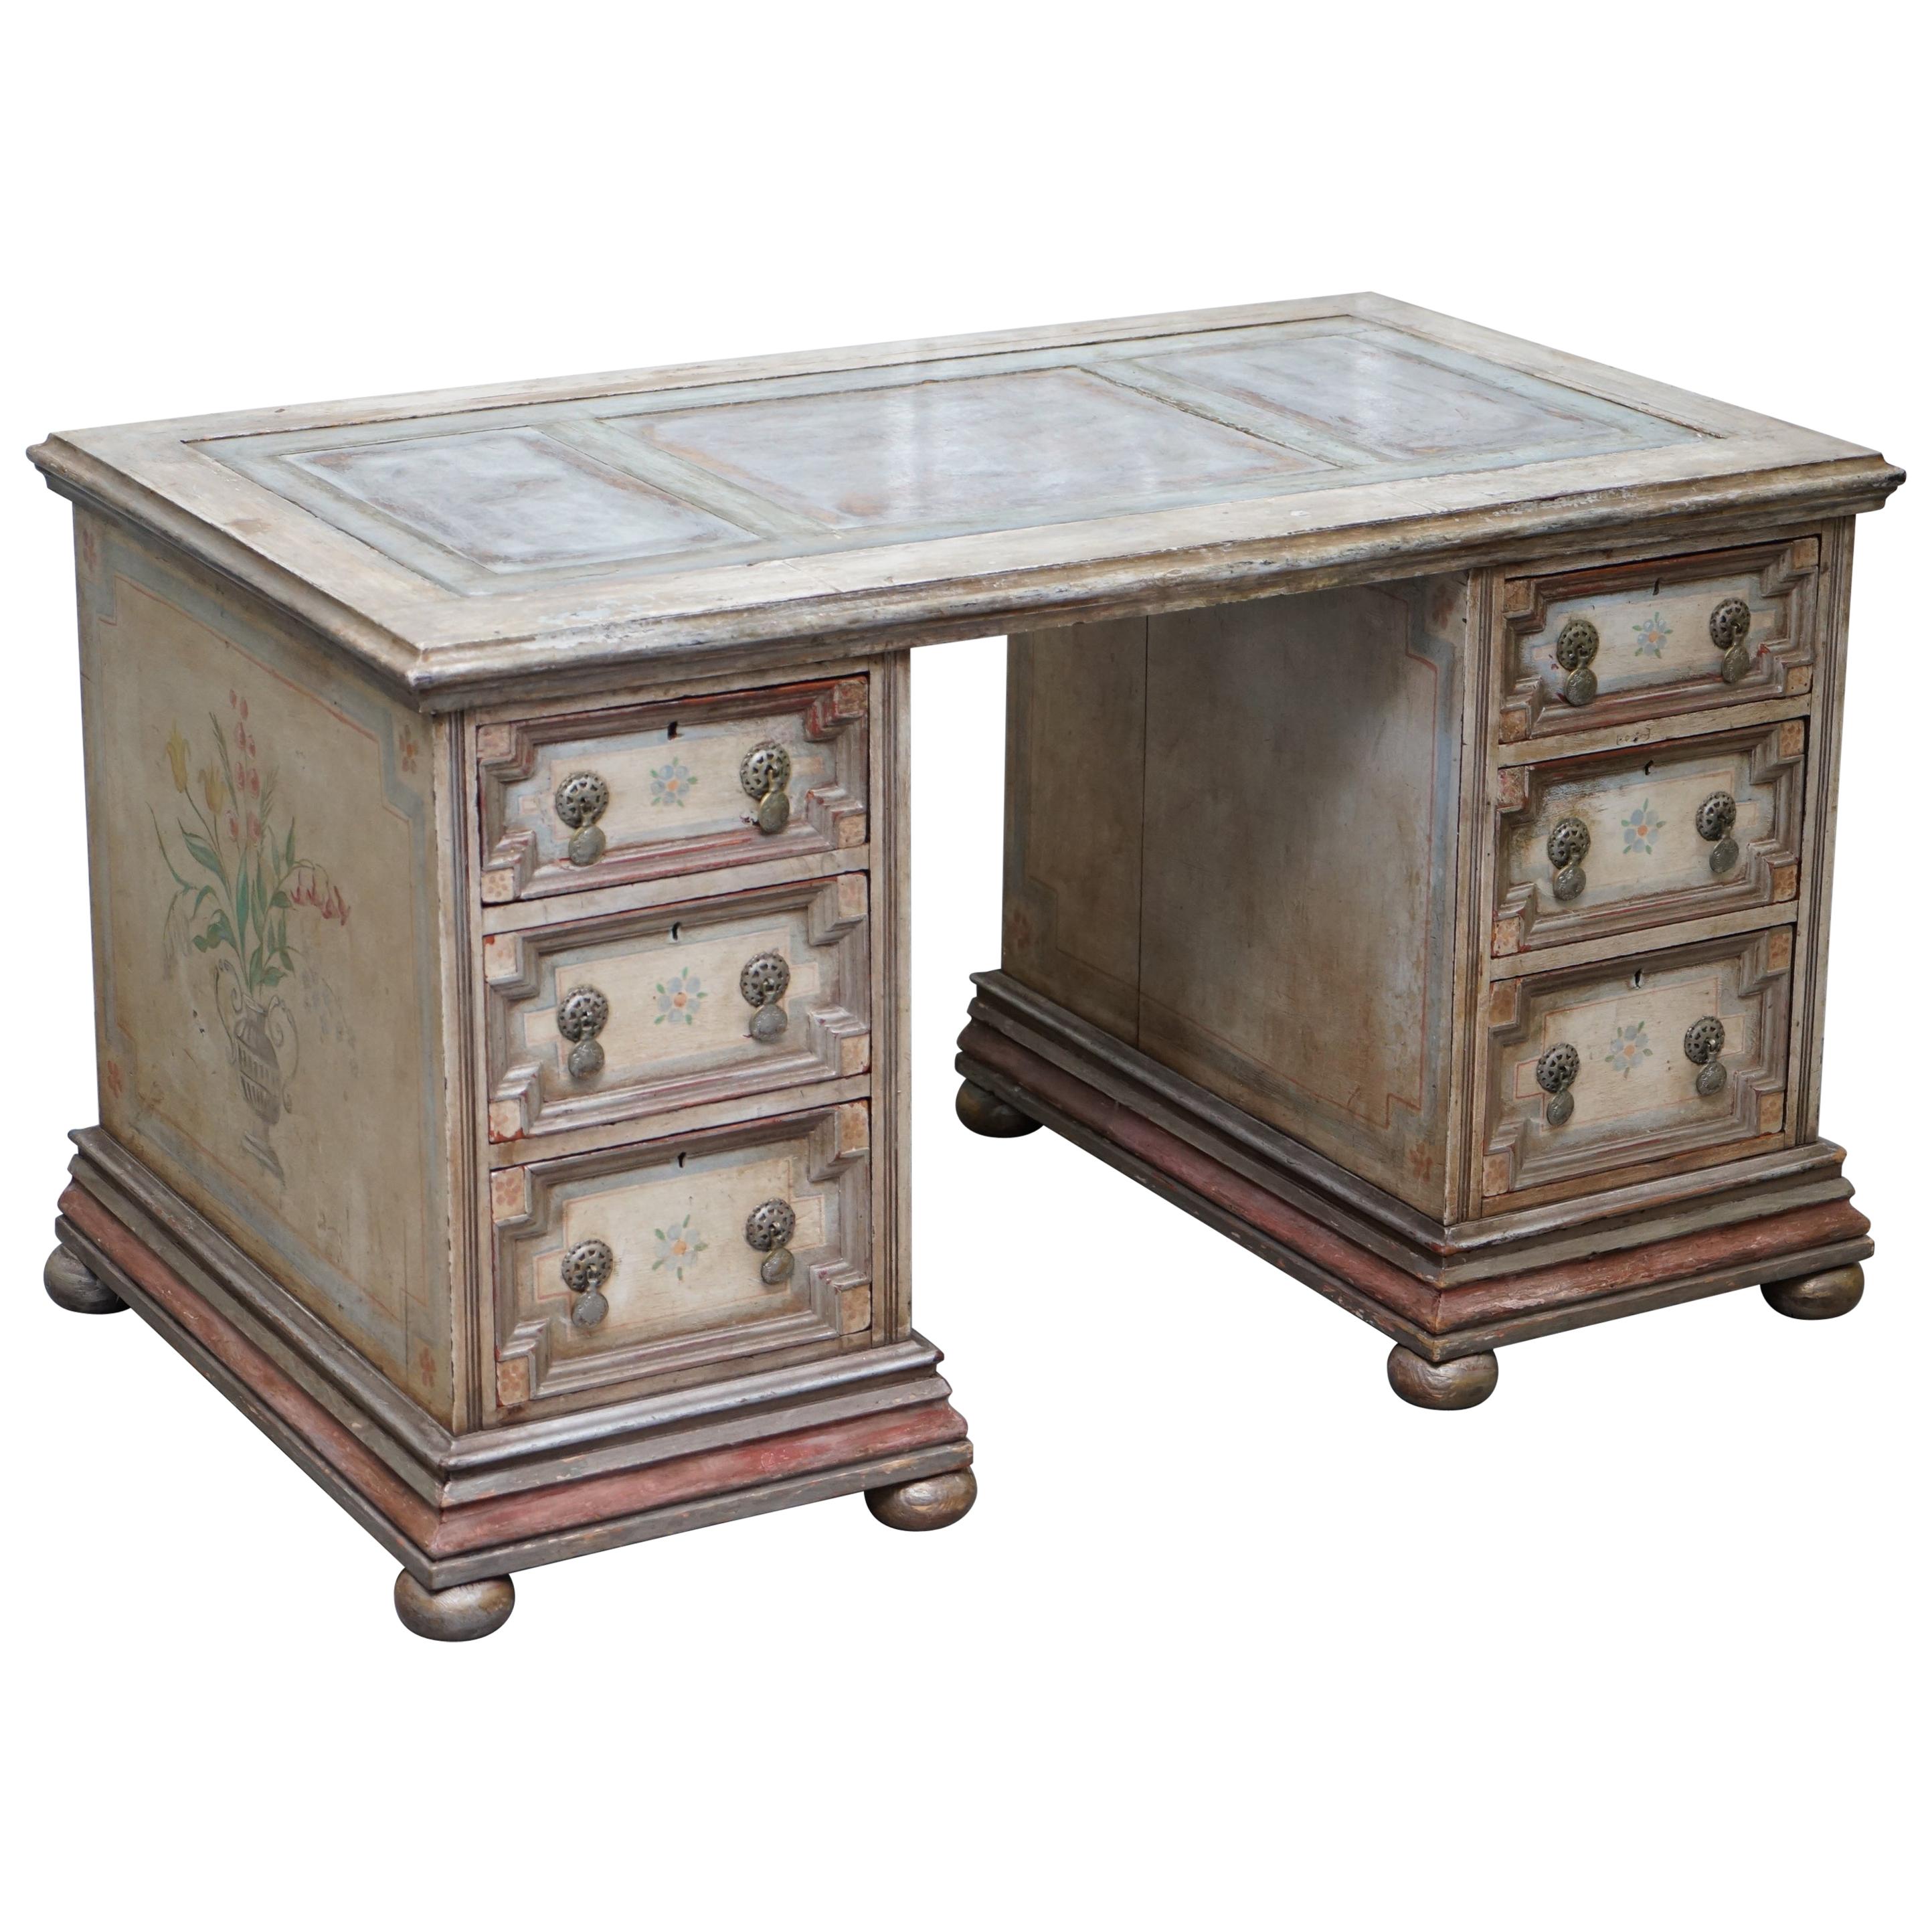 Rare Hand Painted Pedestal Desk by the Artist Ambrose Thomas Marquis d'Oisy For Sale